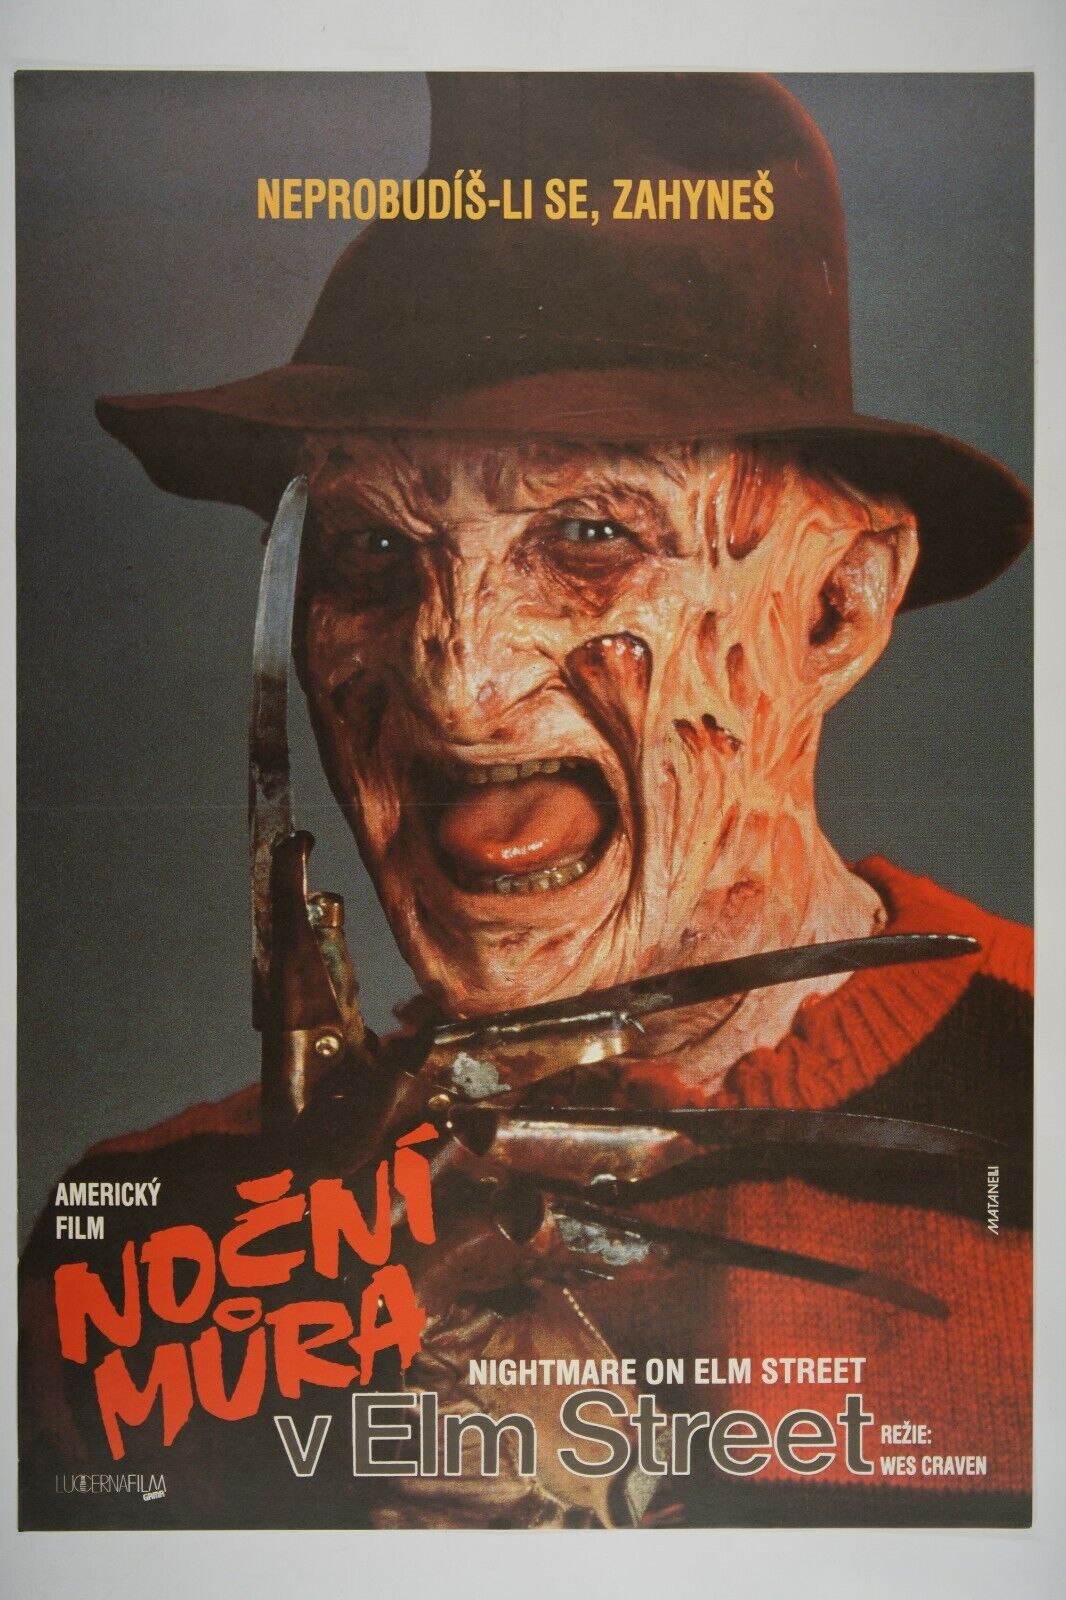 A NIGHTMARE ON ELM STREET 23x33 Orig. Czech movie poster 1984 WES CRAVEN HORROR